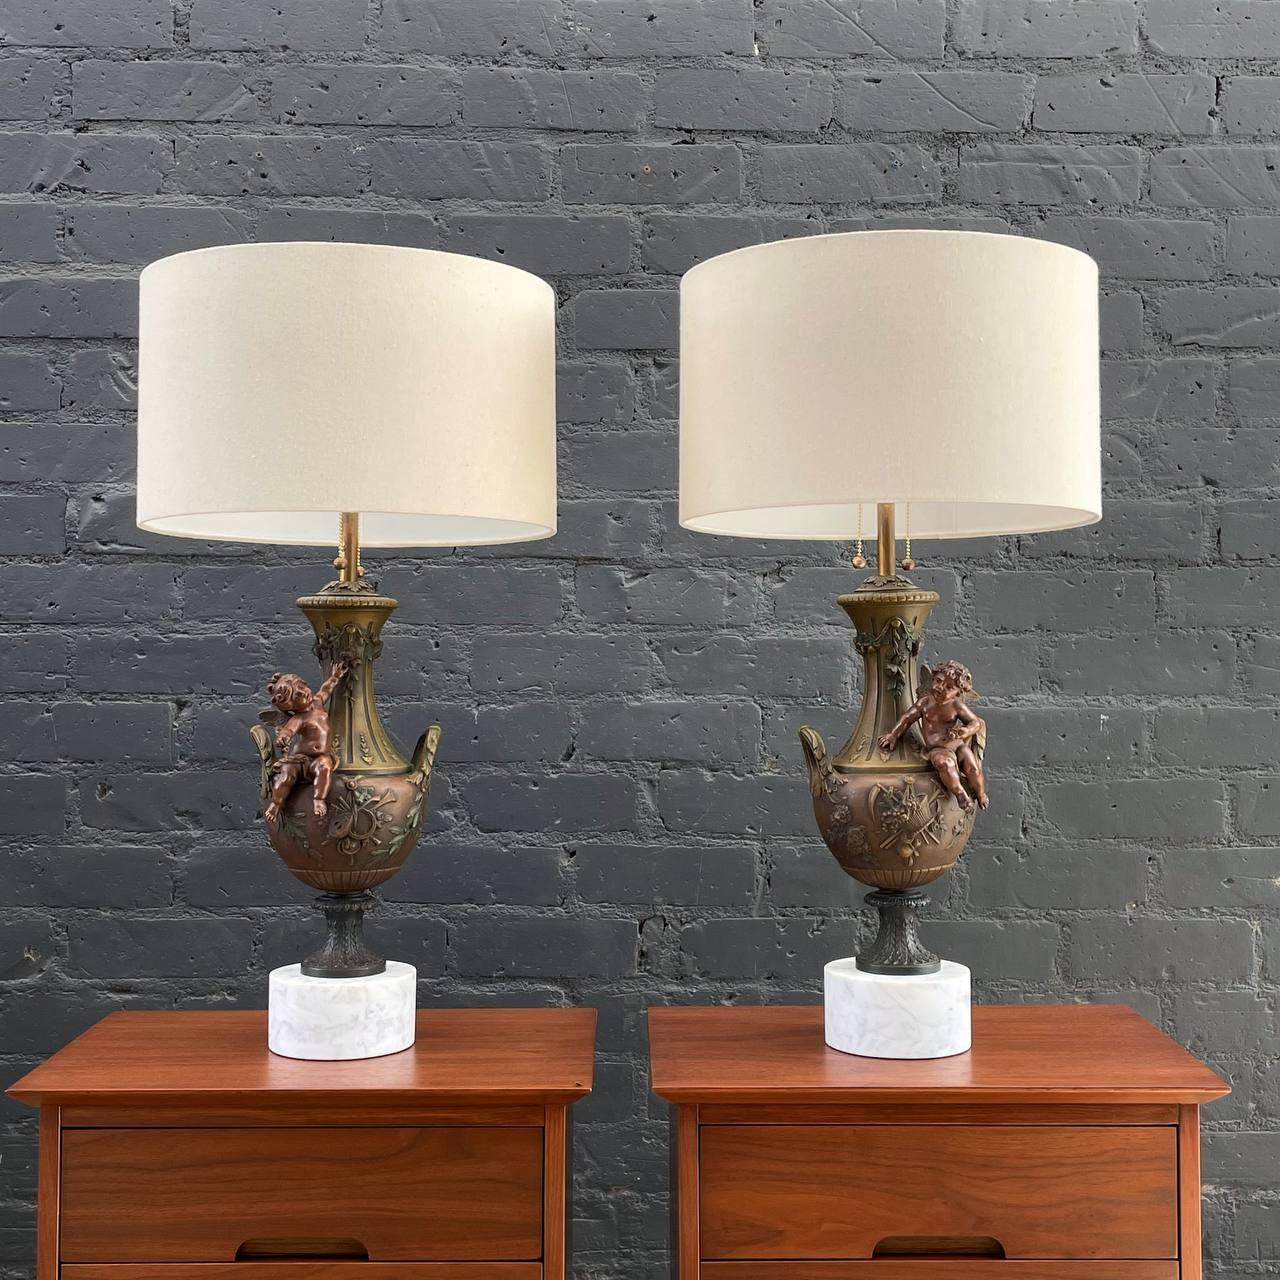 Pair of Antique French Classical Urn Style Table Lamps with Cherubs 

Country: France  
Materials: Painted Bronze, Carrara Marble
Condition: Newly Rewired, New Brass Sockets, New Custom Linen Shades
Style: French Louis XVI
Year: 1920’s

$4,500 set